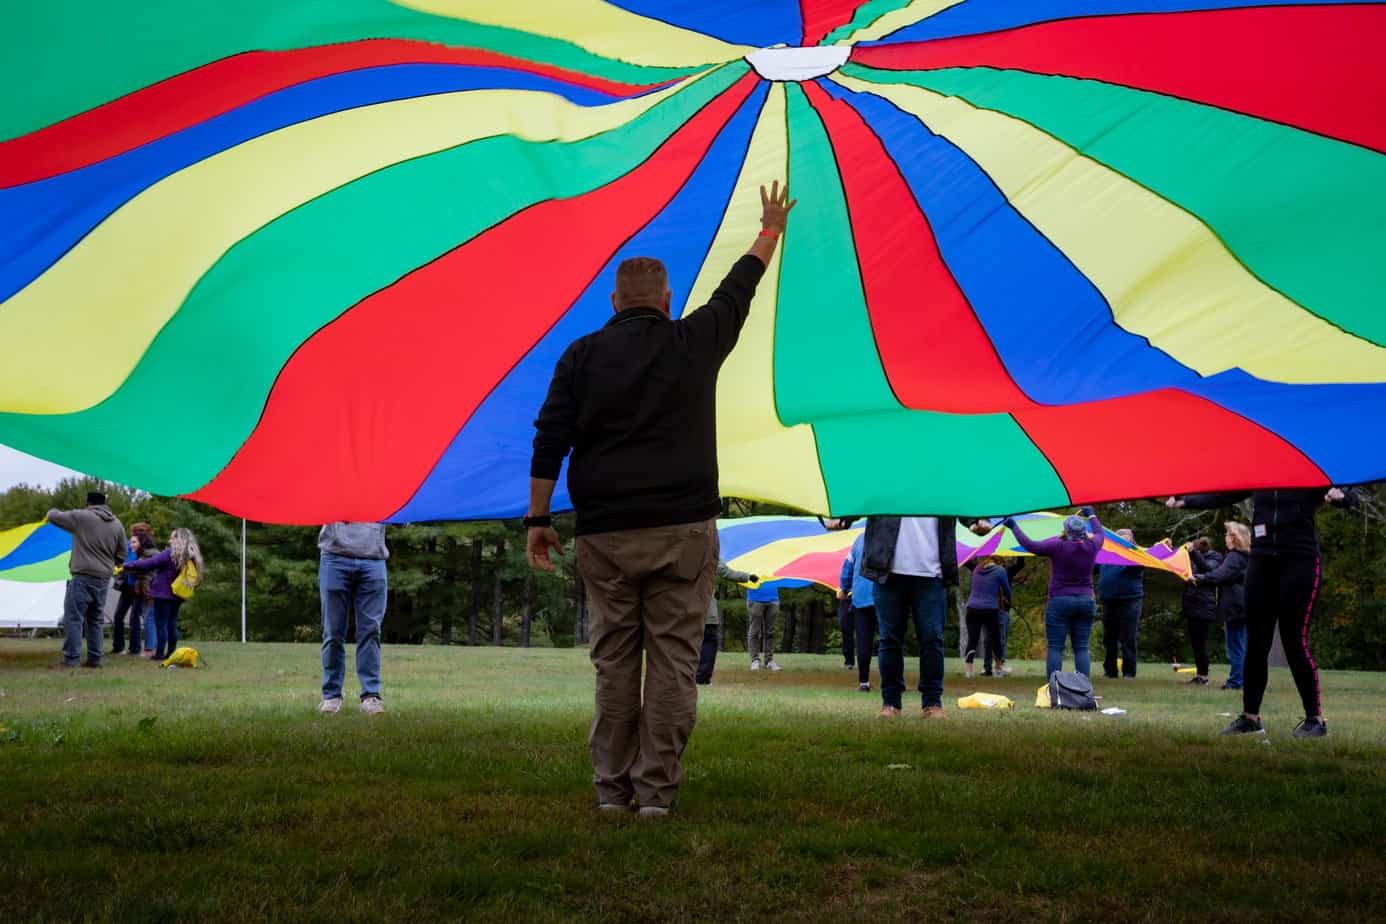 A group of people playing parachute lawn games at the Mountainside addiction treatment center.